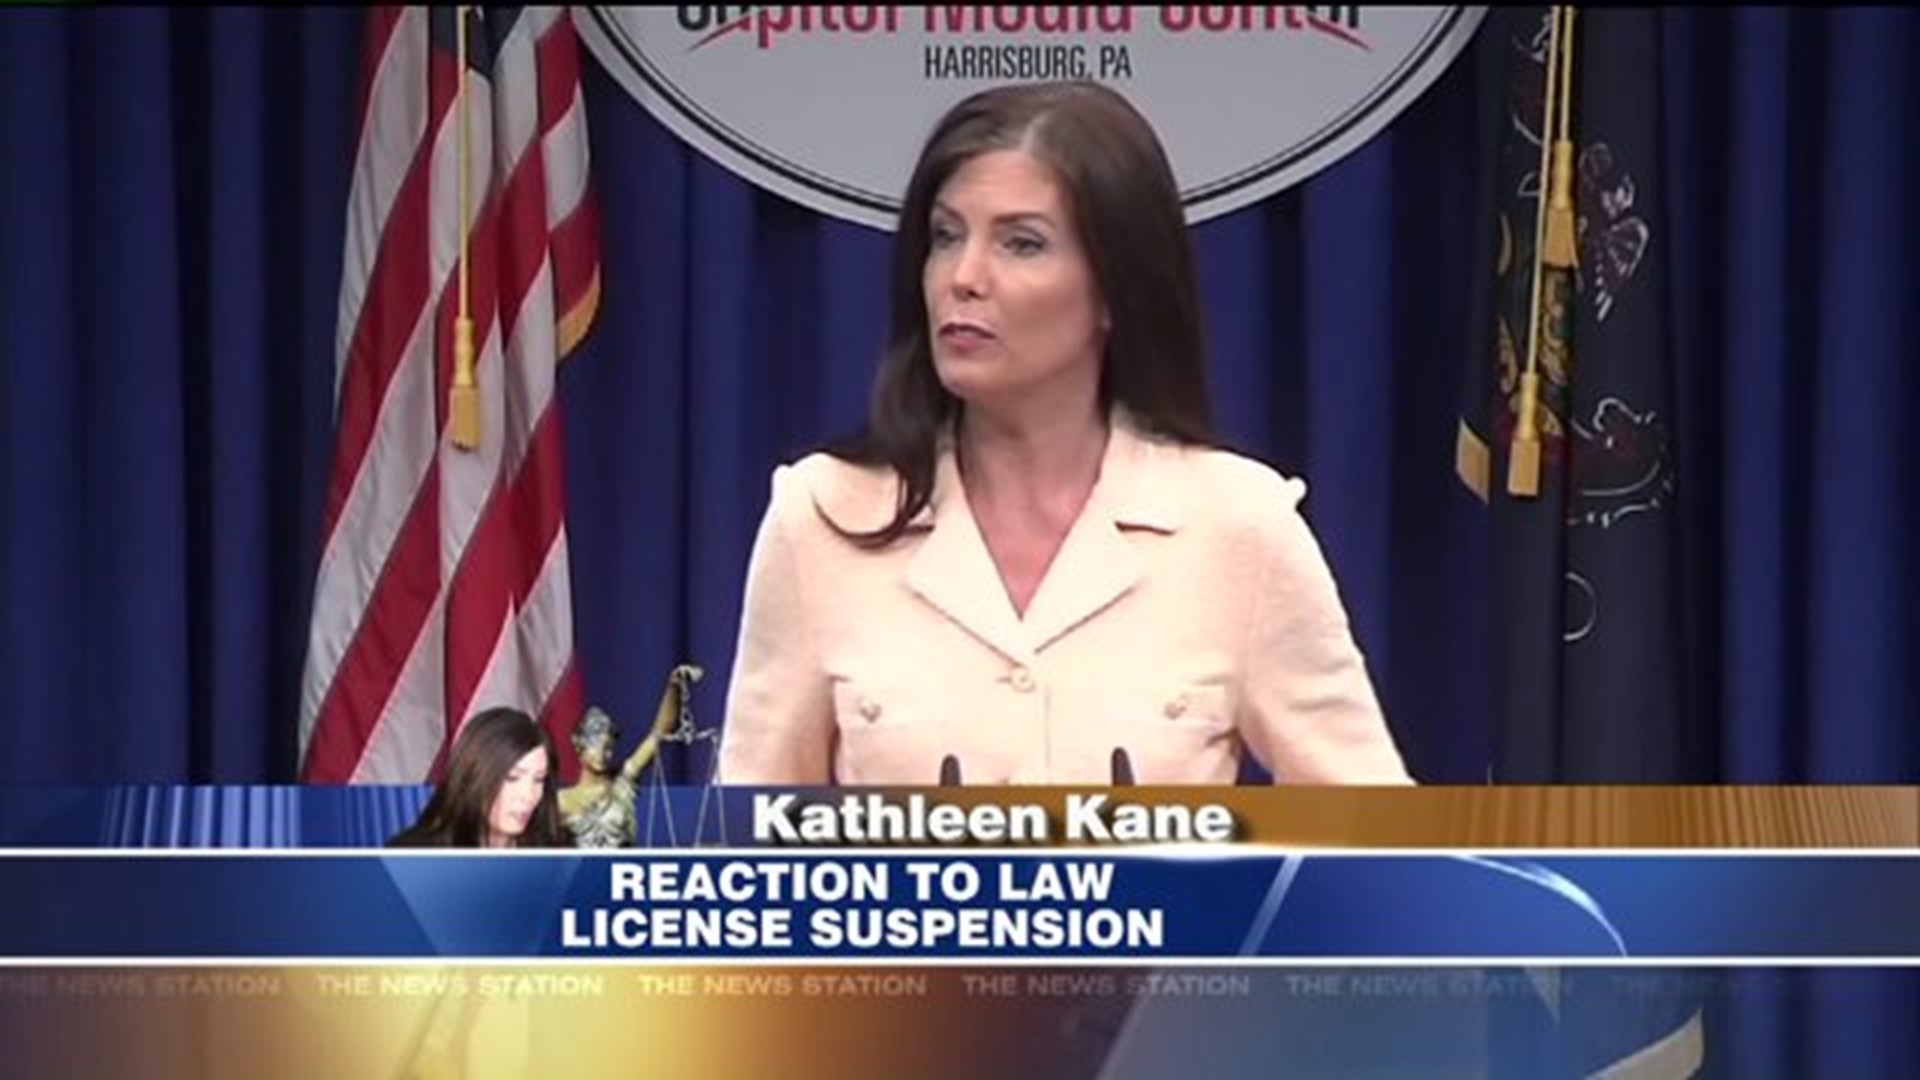 What Should Happen to Kathleen Kane?